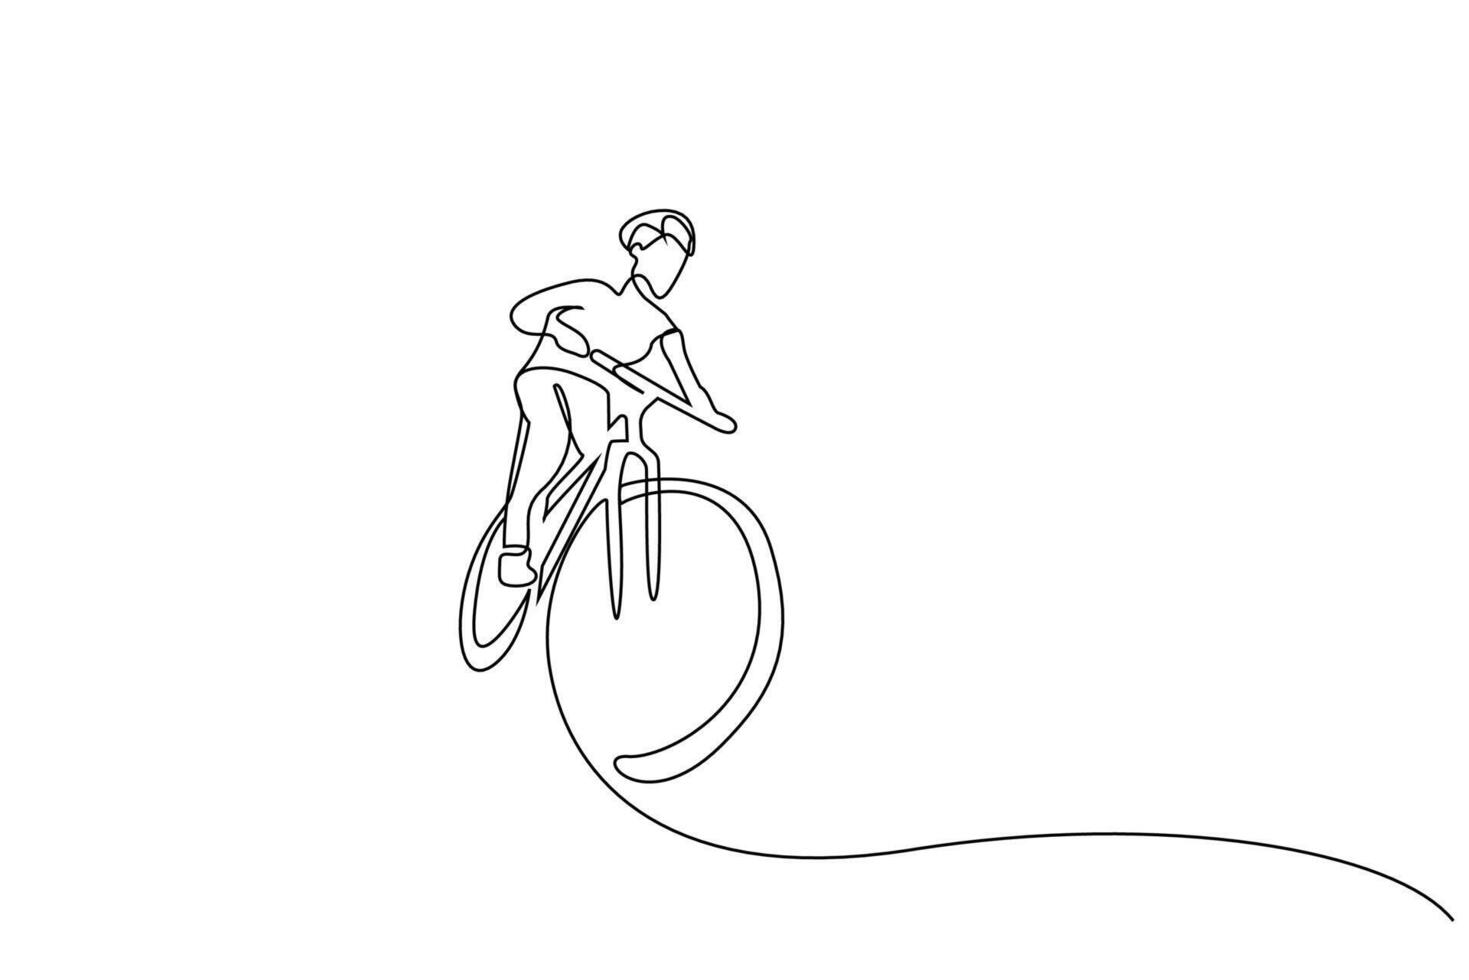 human person male bicycle activity sport fun race outdoor one line art design vector